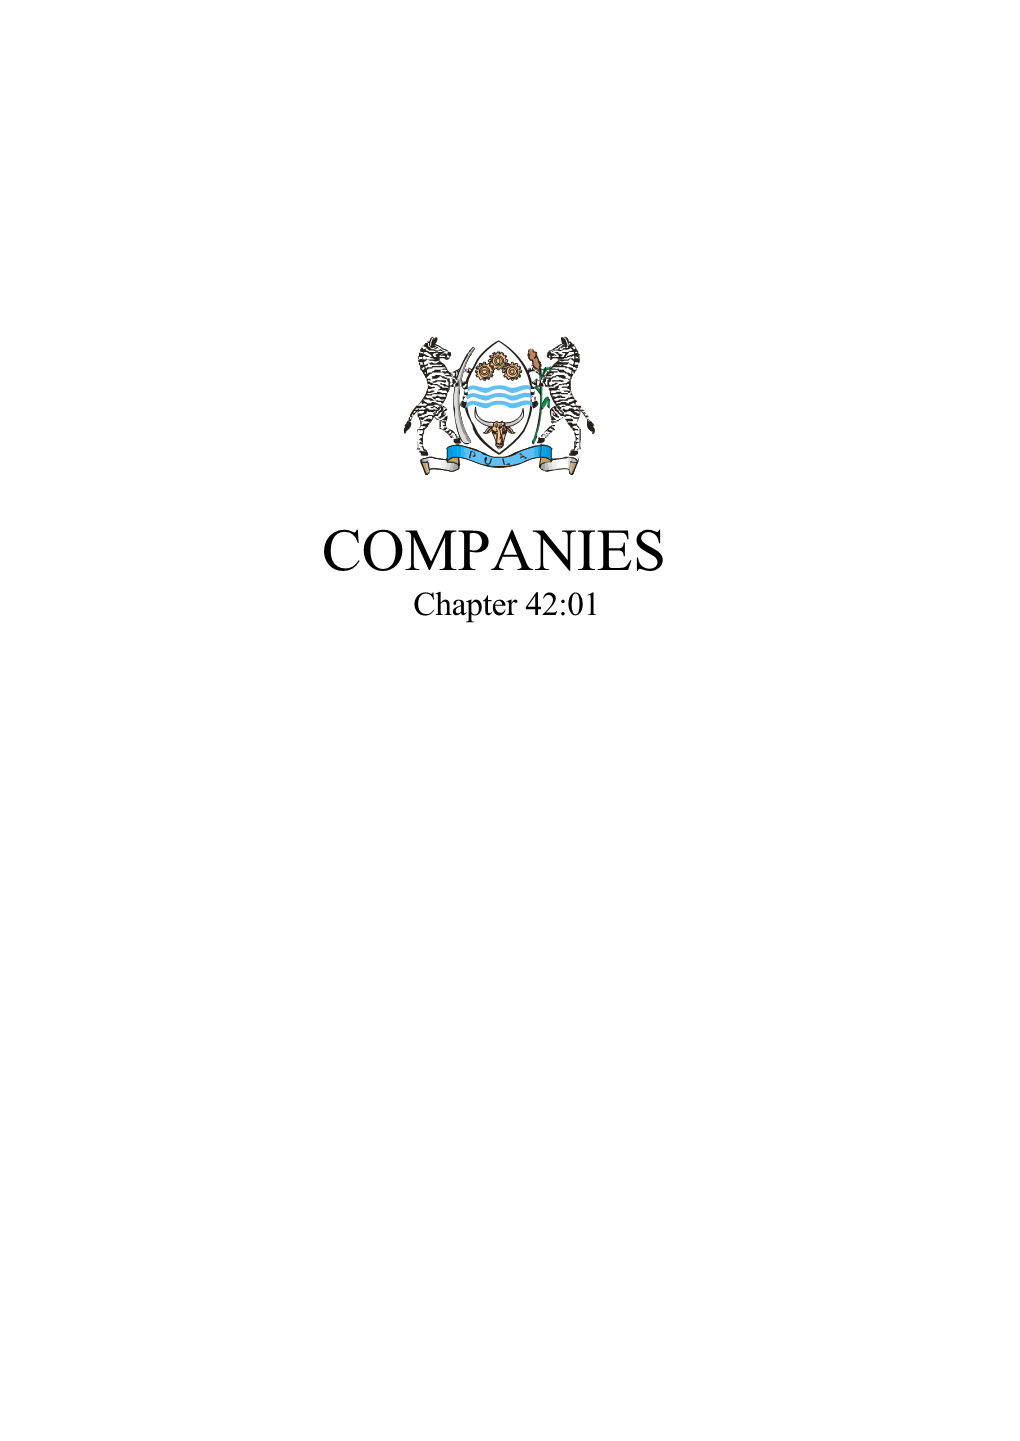 COMPANIES Chapter 42:01